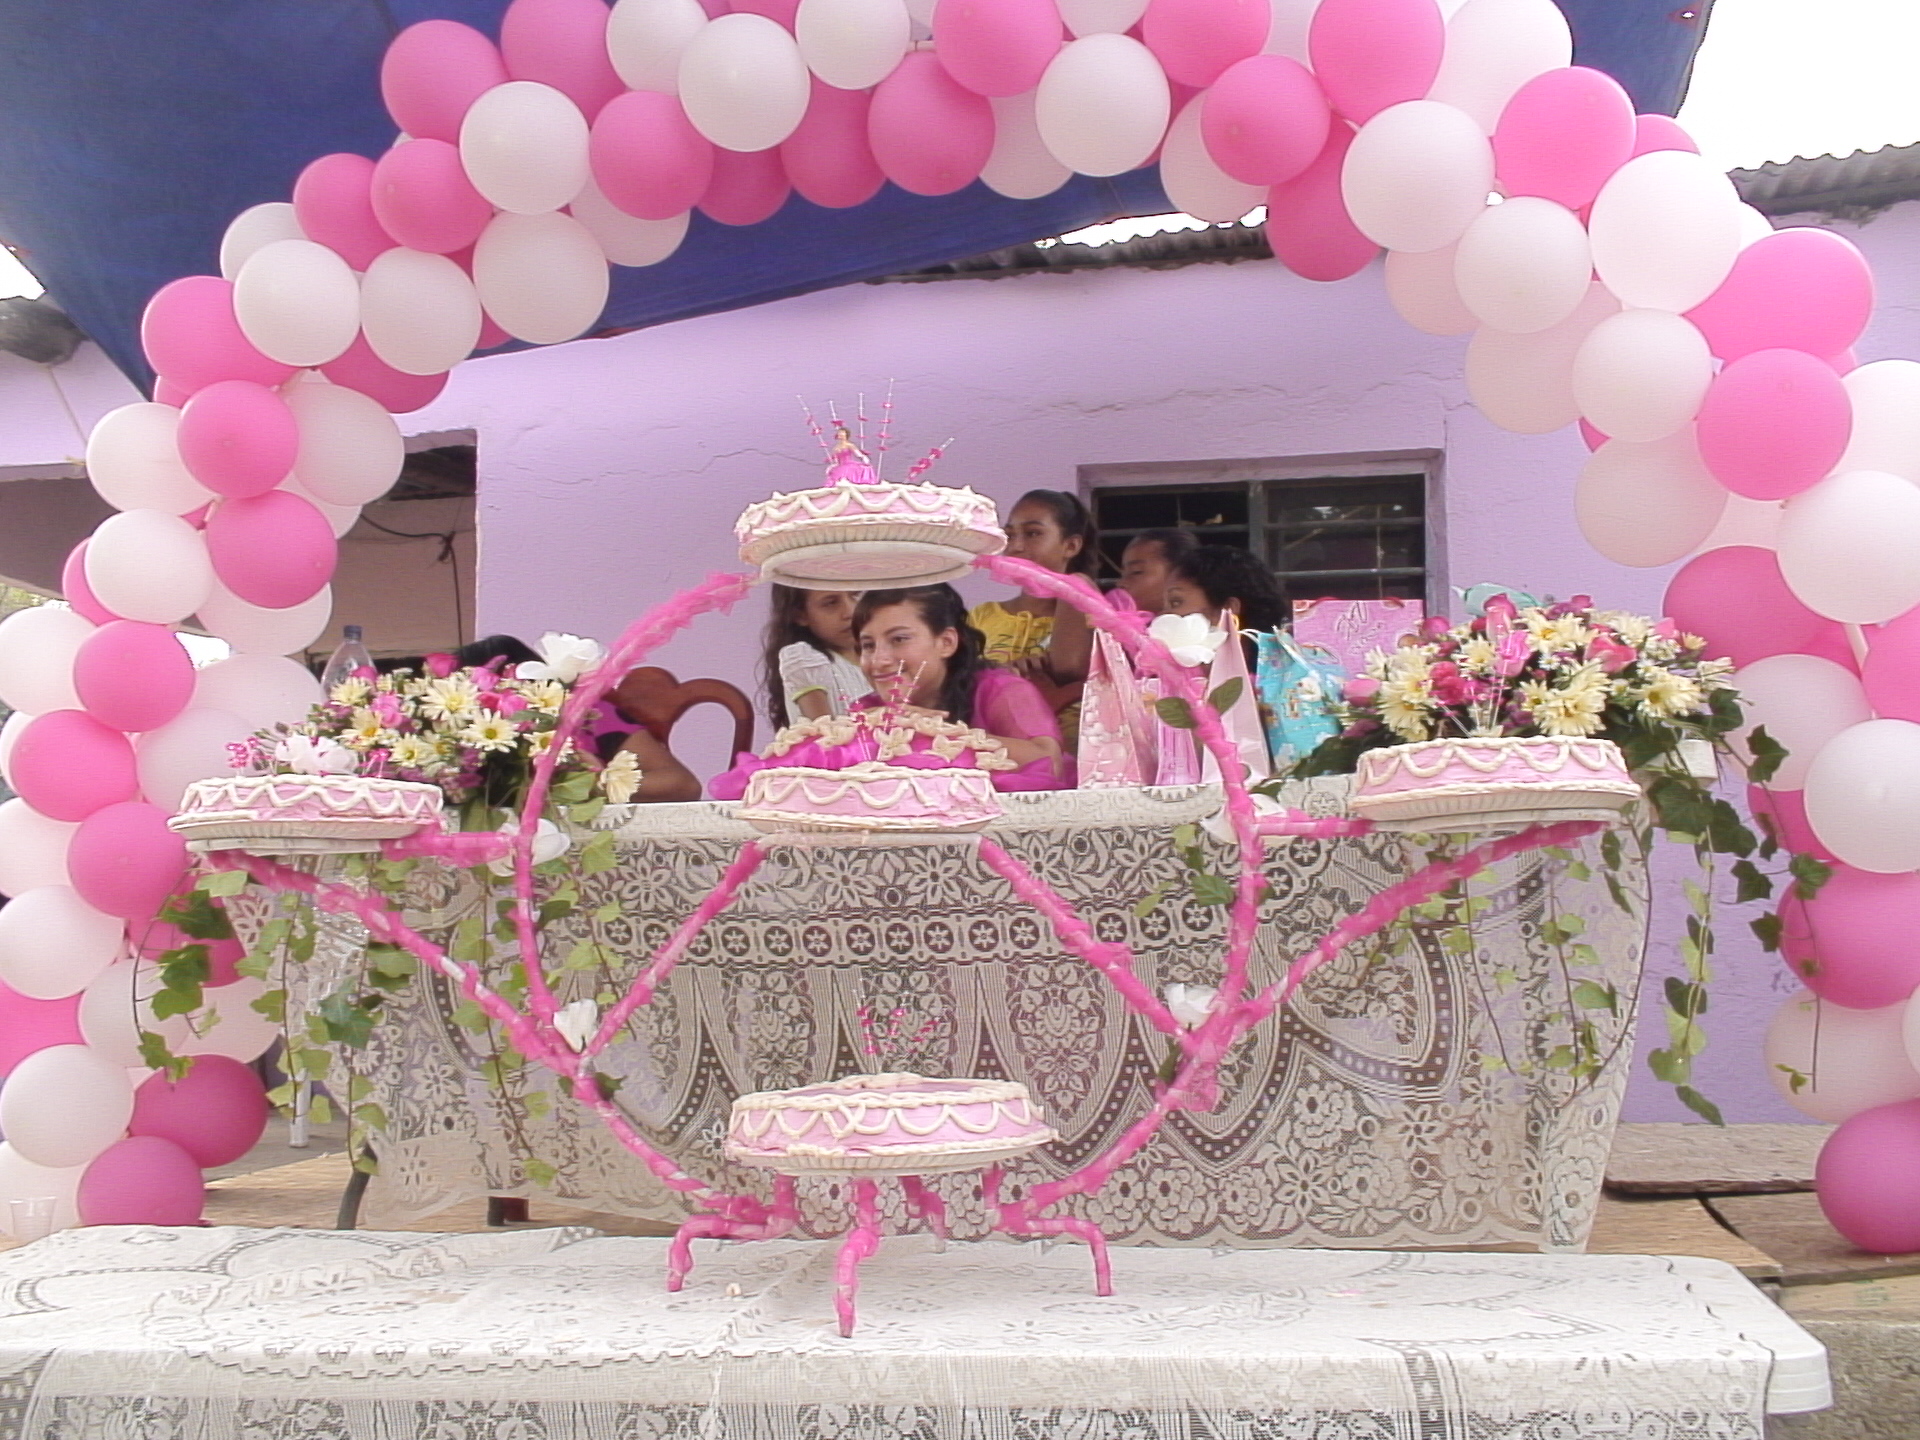 basavanna hd wallpapers,pink,decoration,balloon,party supply,architecture